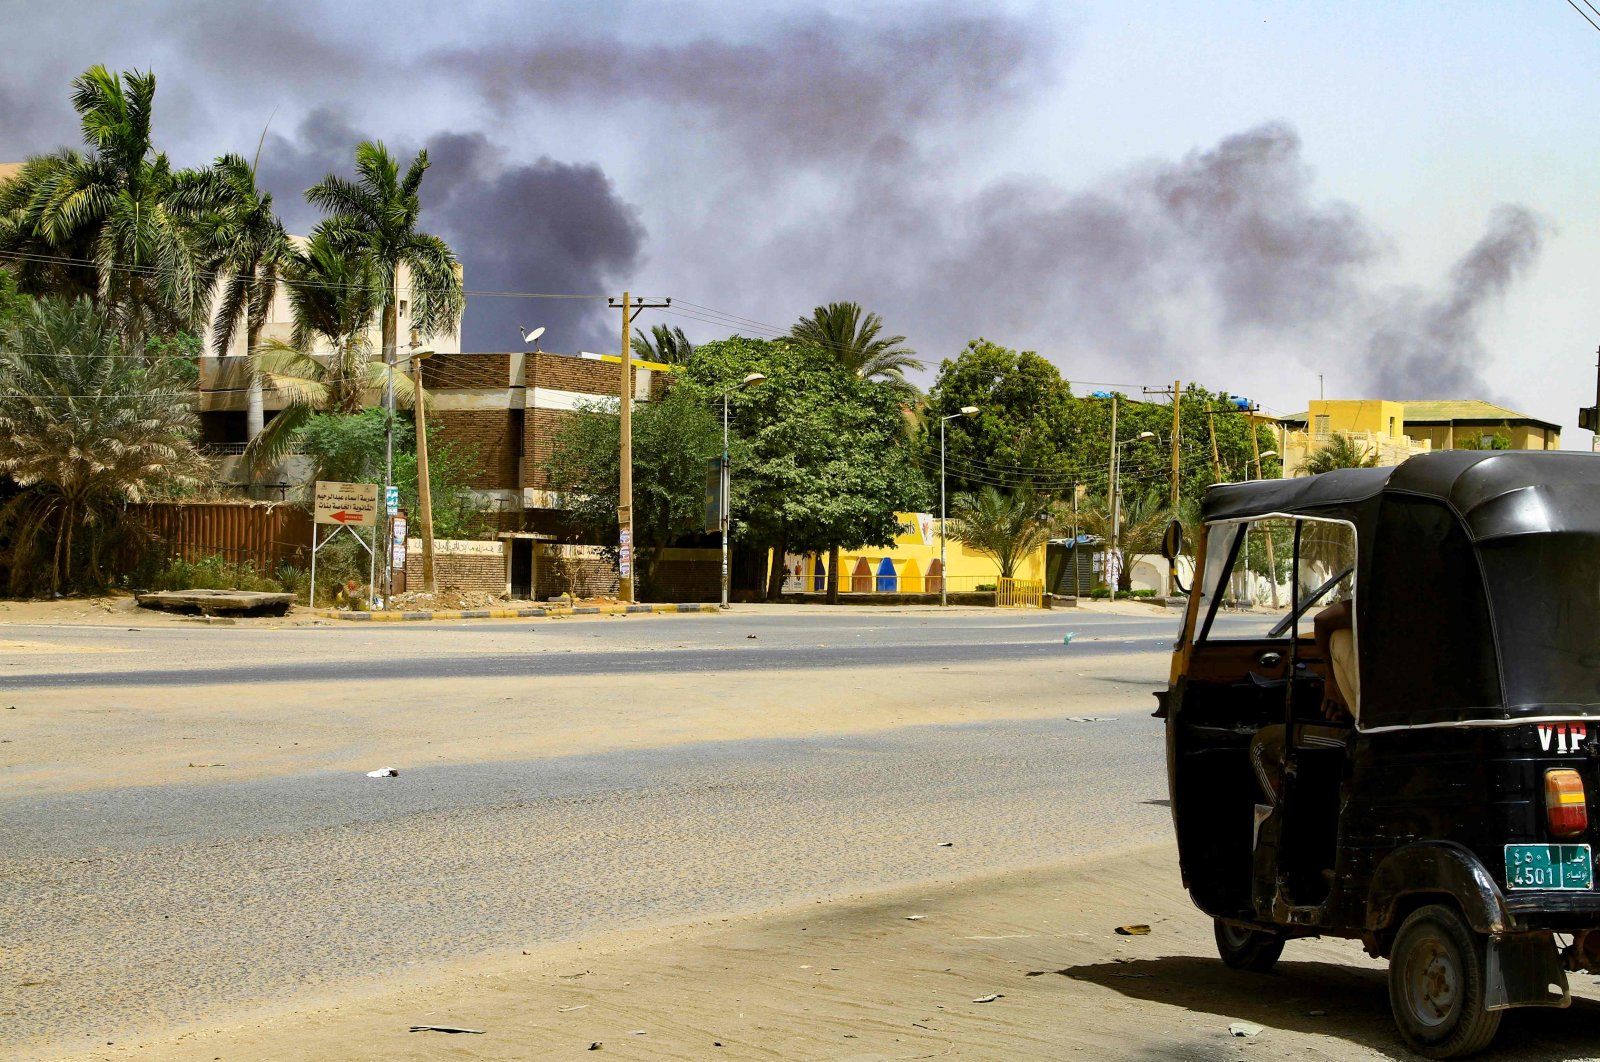 Smoke rises from buildings as a tuktuk taxi driver sits in his vehicle along a deserted street in Khartoum, Sudan, April 16, 2023. (AFP Photo)